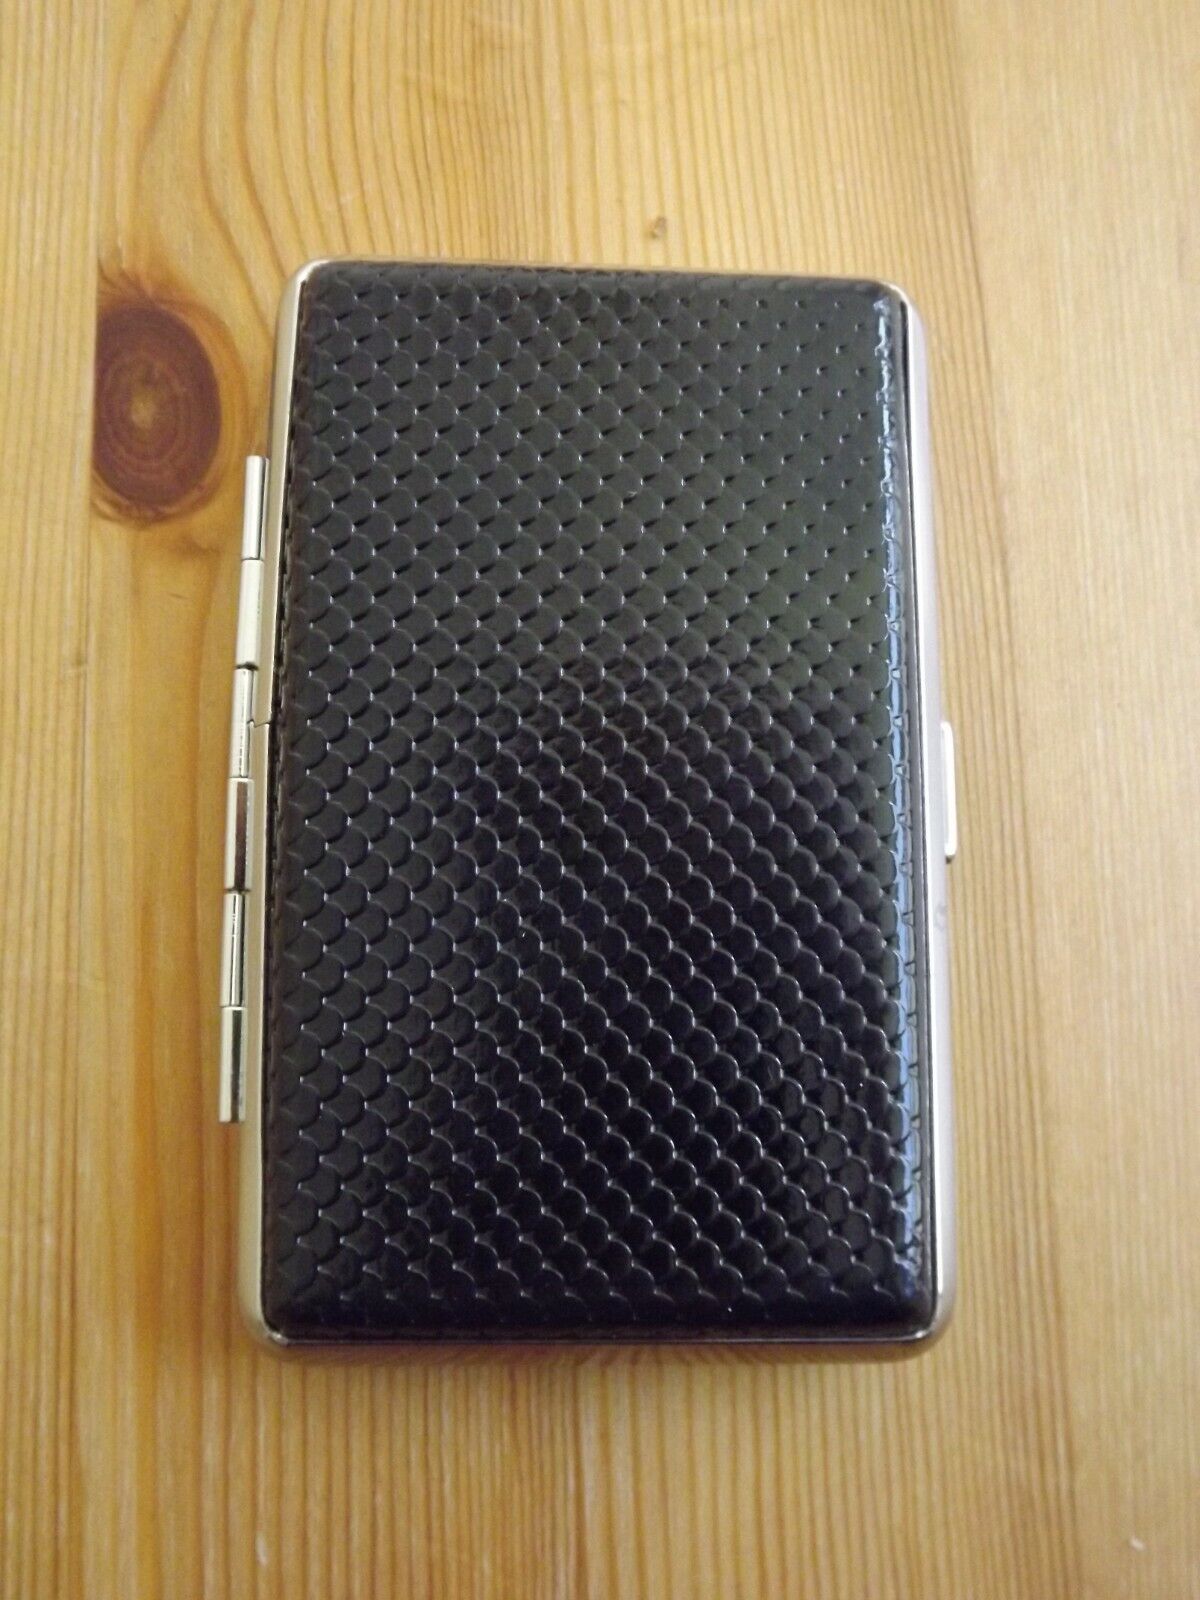 Metal Leather Snake Skin Pattern Double Sided King & 100's Cigarette Case